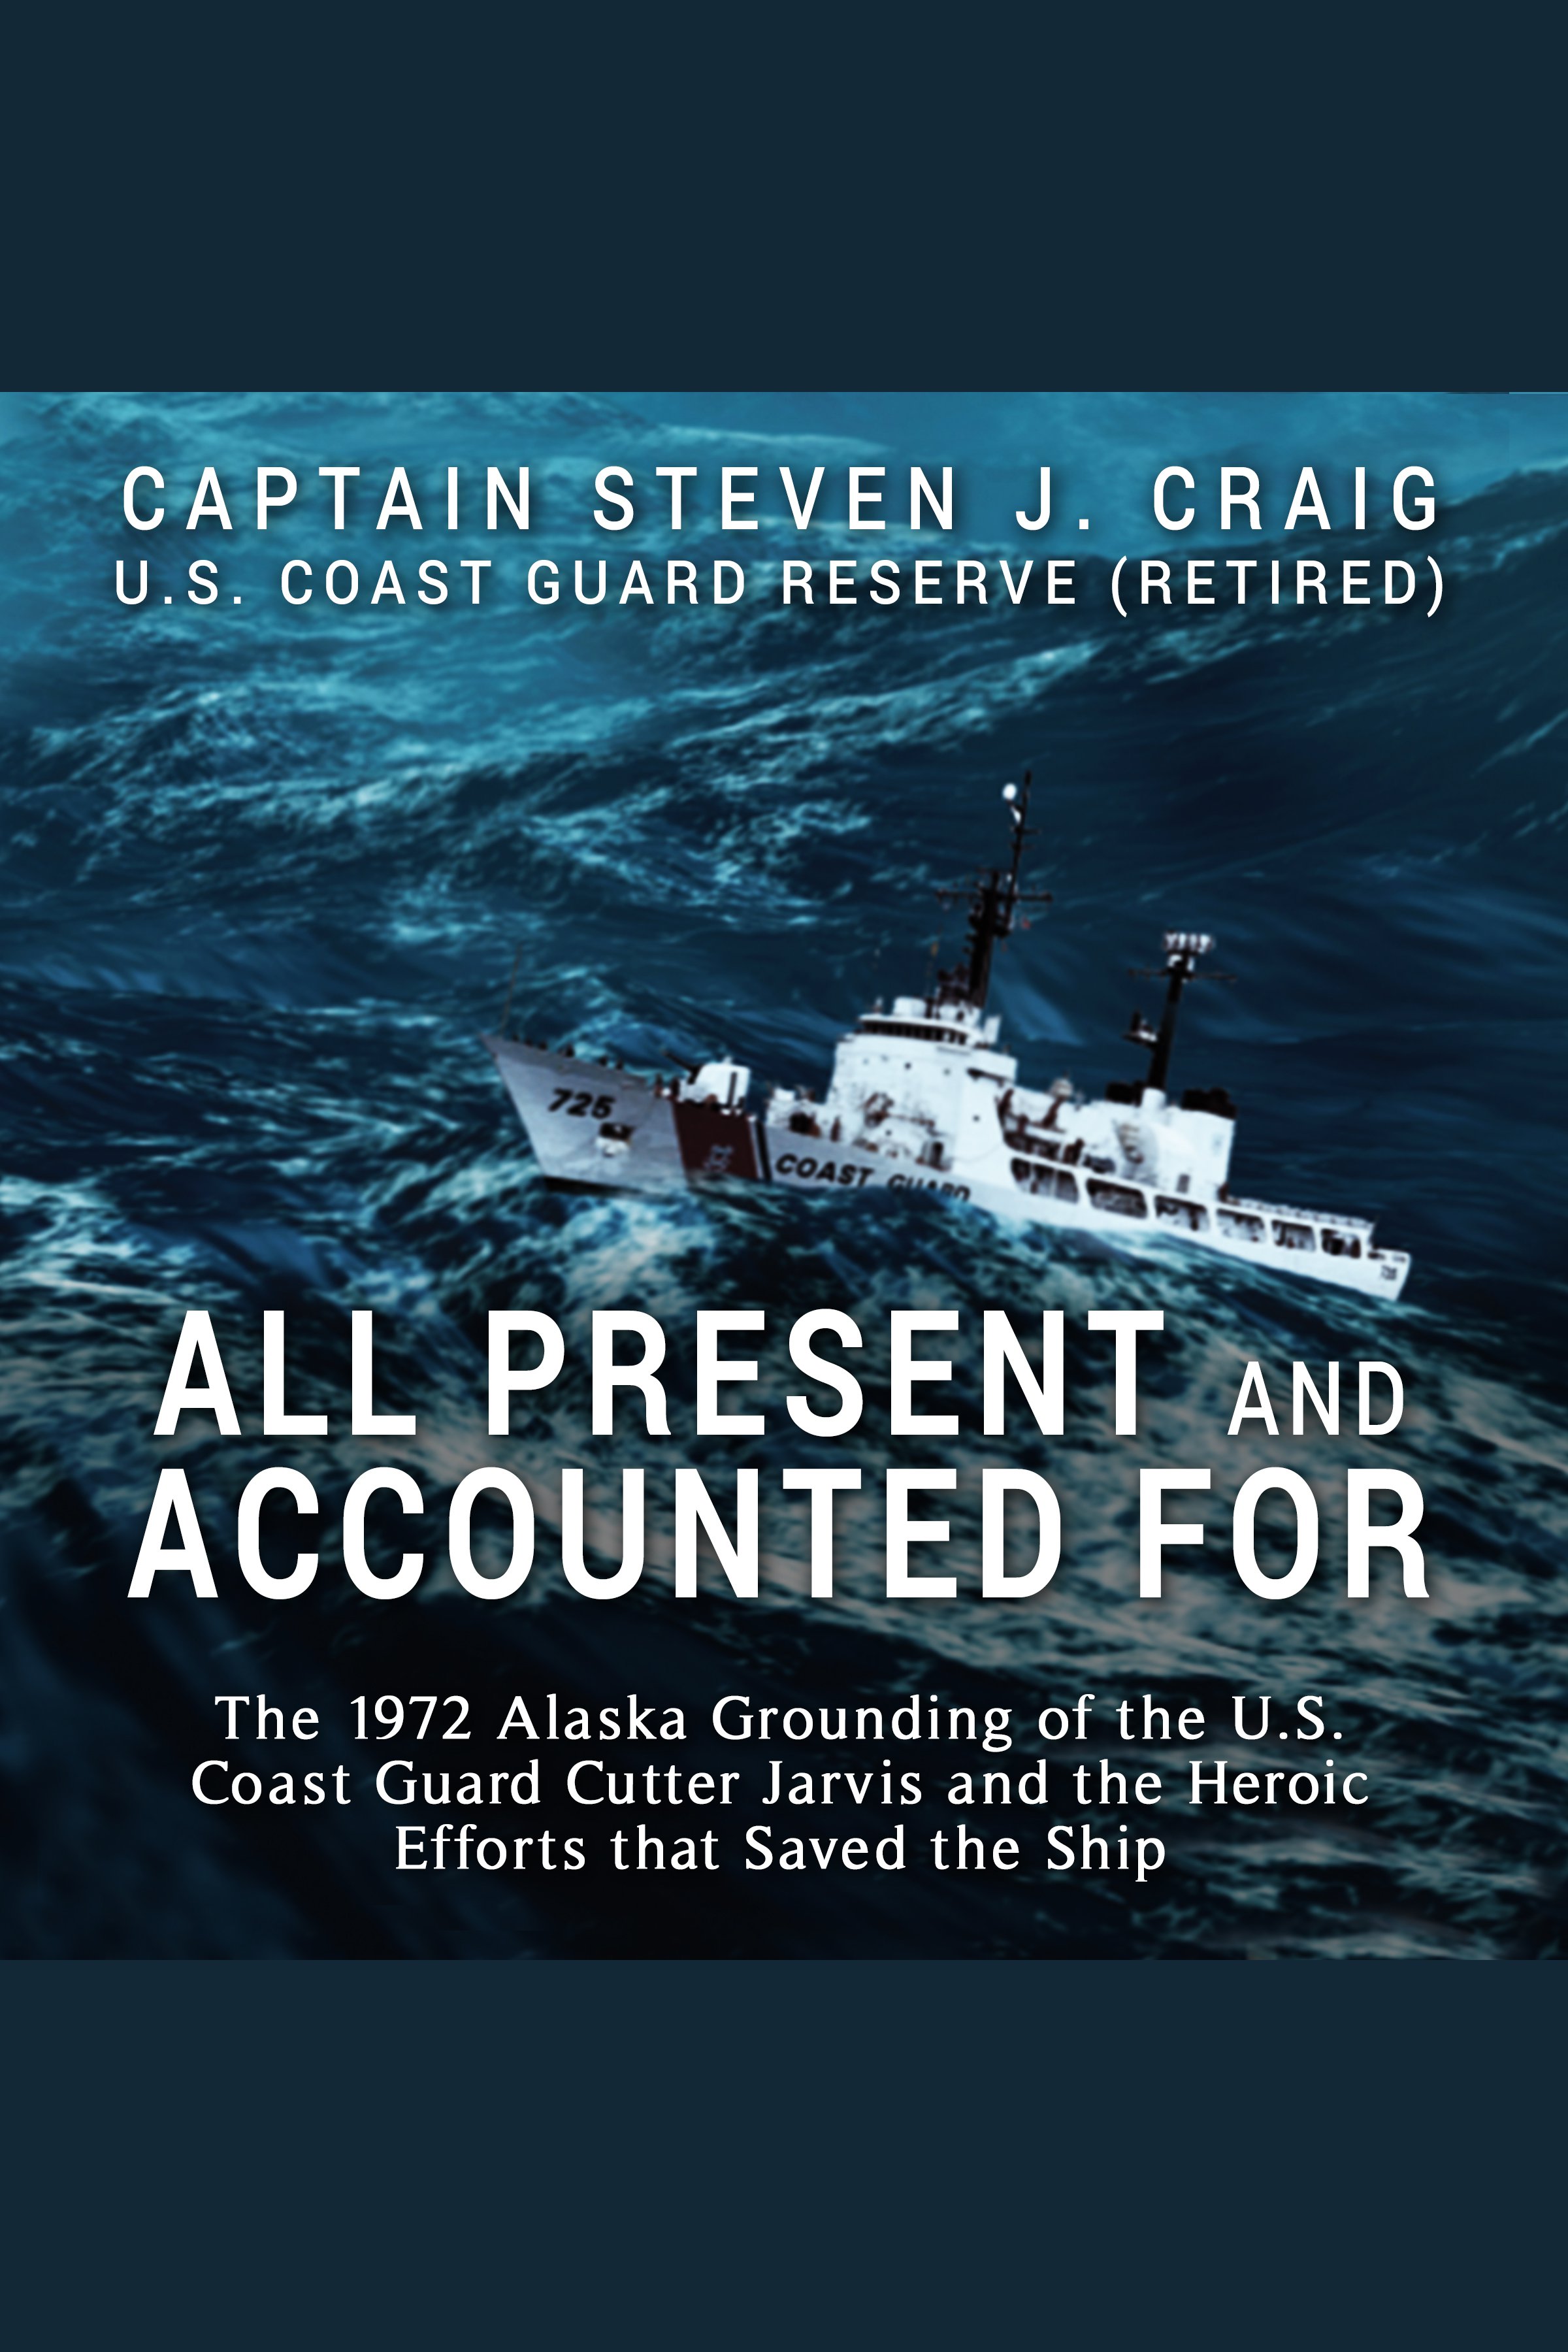 "All Present and Accounted For" The 1972 Alaska Grounding of the U.S. Coast Guard Cutter Jarvis and the Heroic Efforts that Saved the Ship cover image